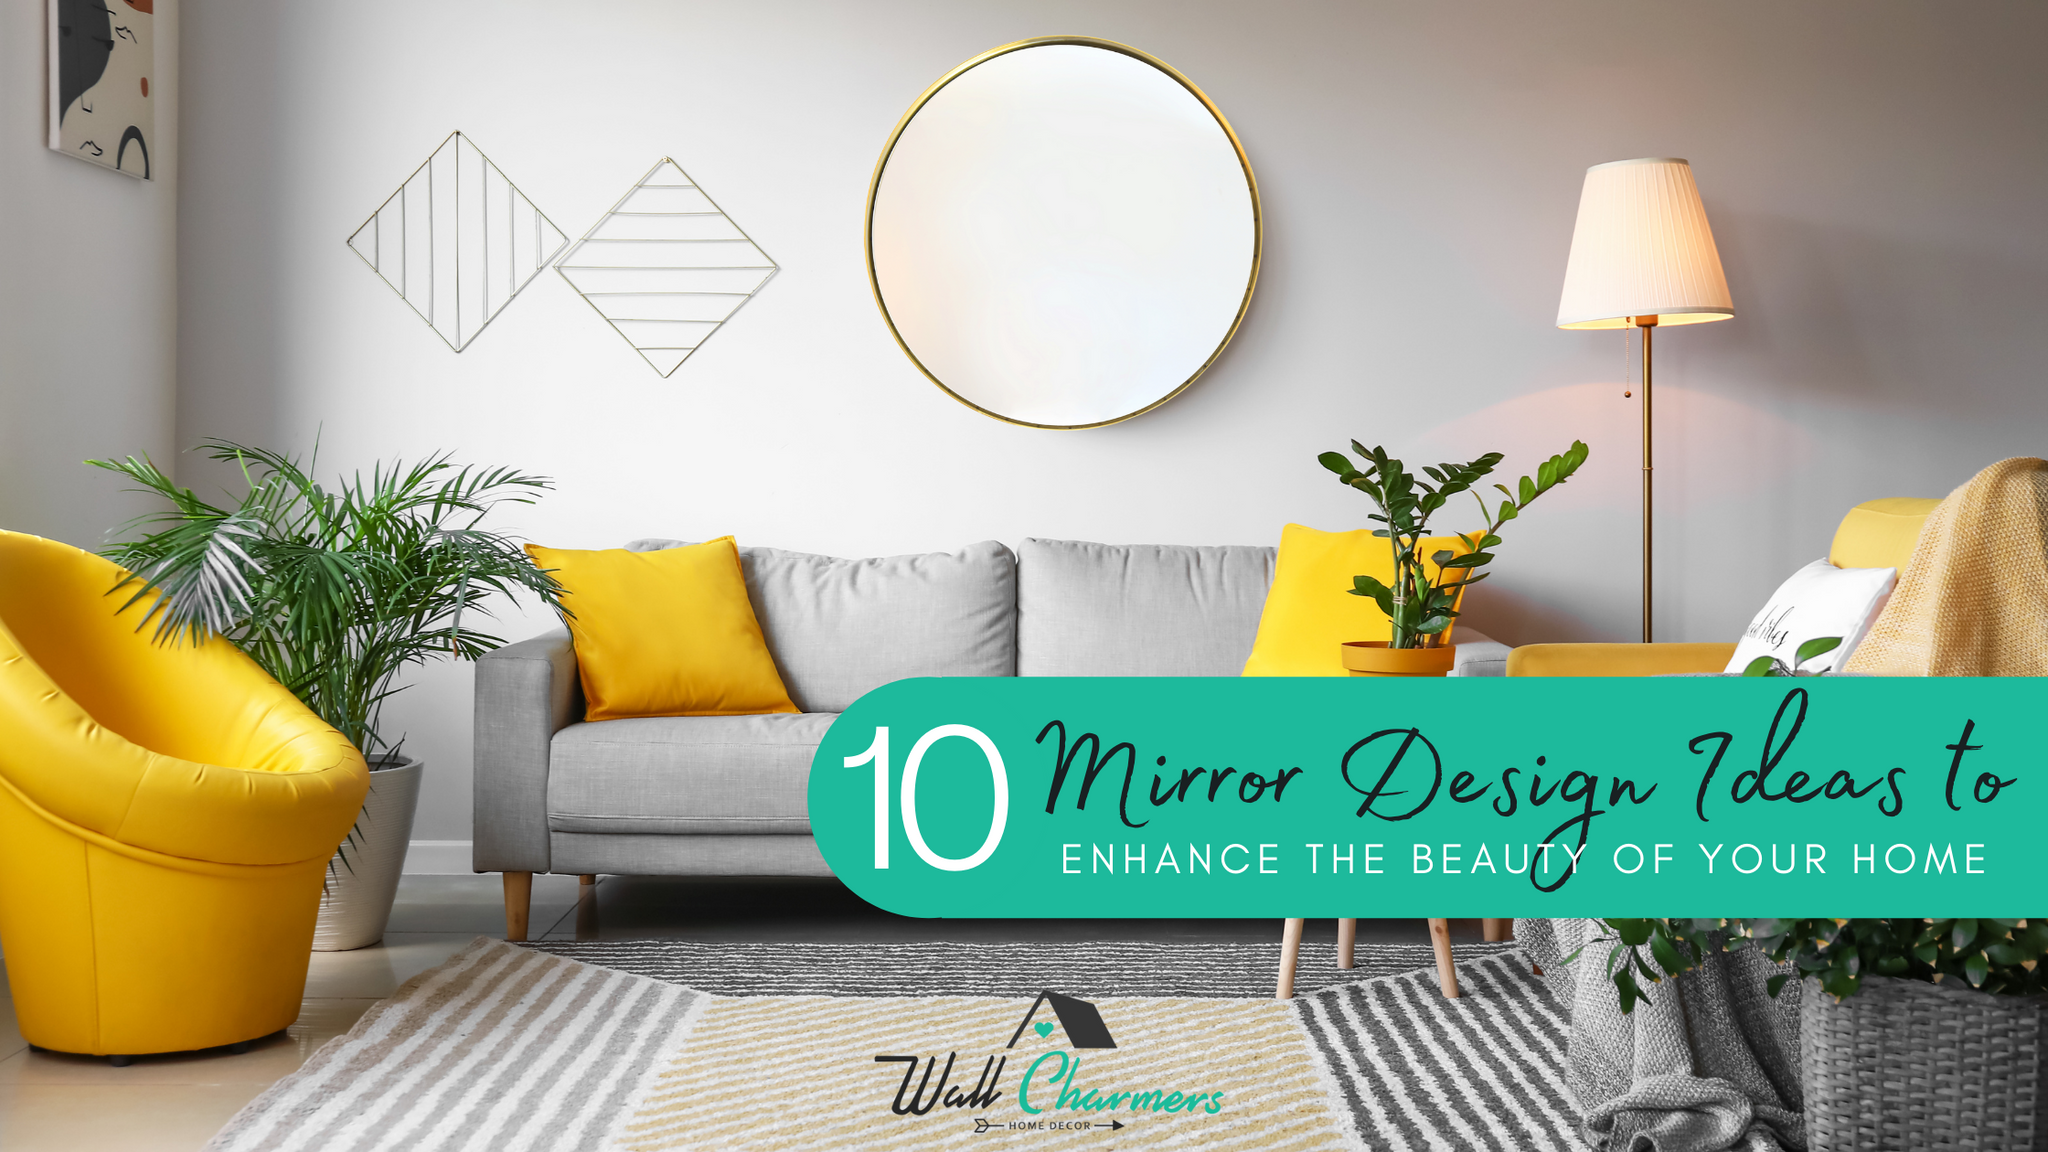 10 Mirror Design Ideas to Enhance the Beauty of your Home